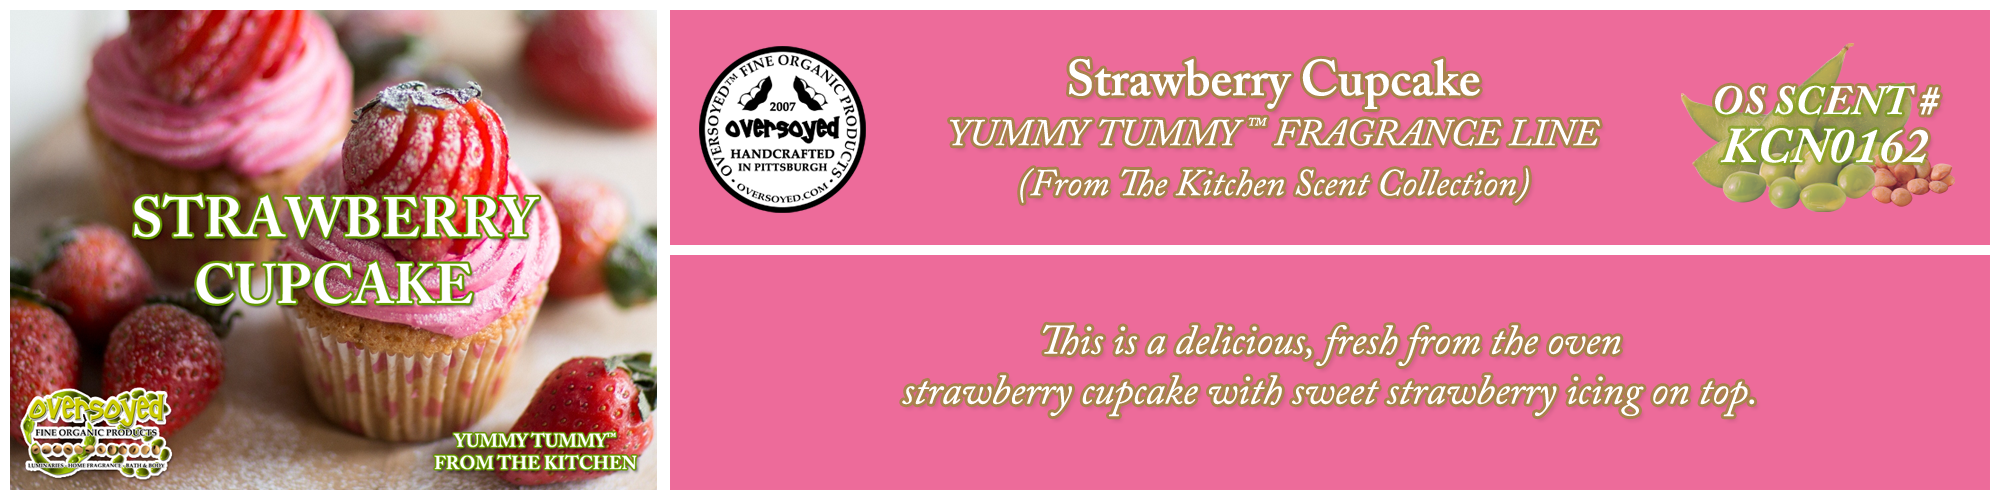 Strawberry Cupcake Handcrafted Products Collection